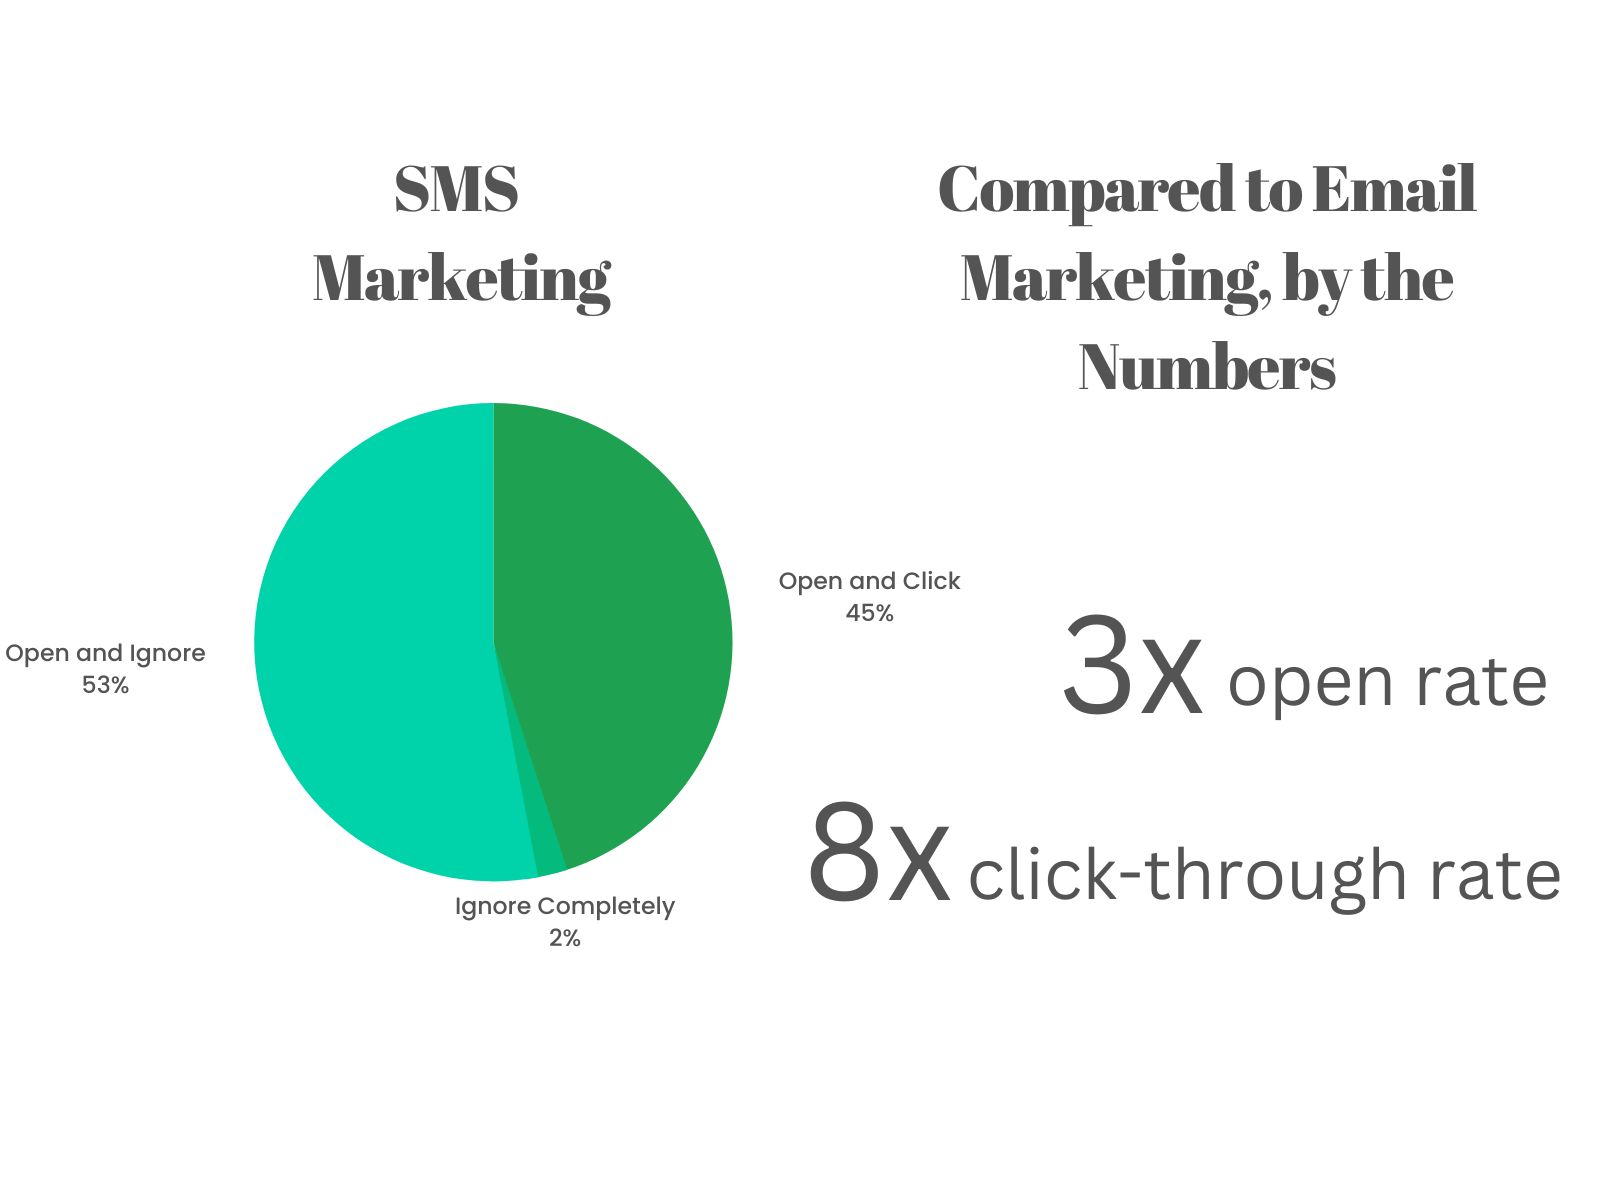 pie graph for SMS marketing: open and ignore=53%, open and click = 45%, ignore completely = 2%; 3x open rate, 8x click-through rate